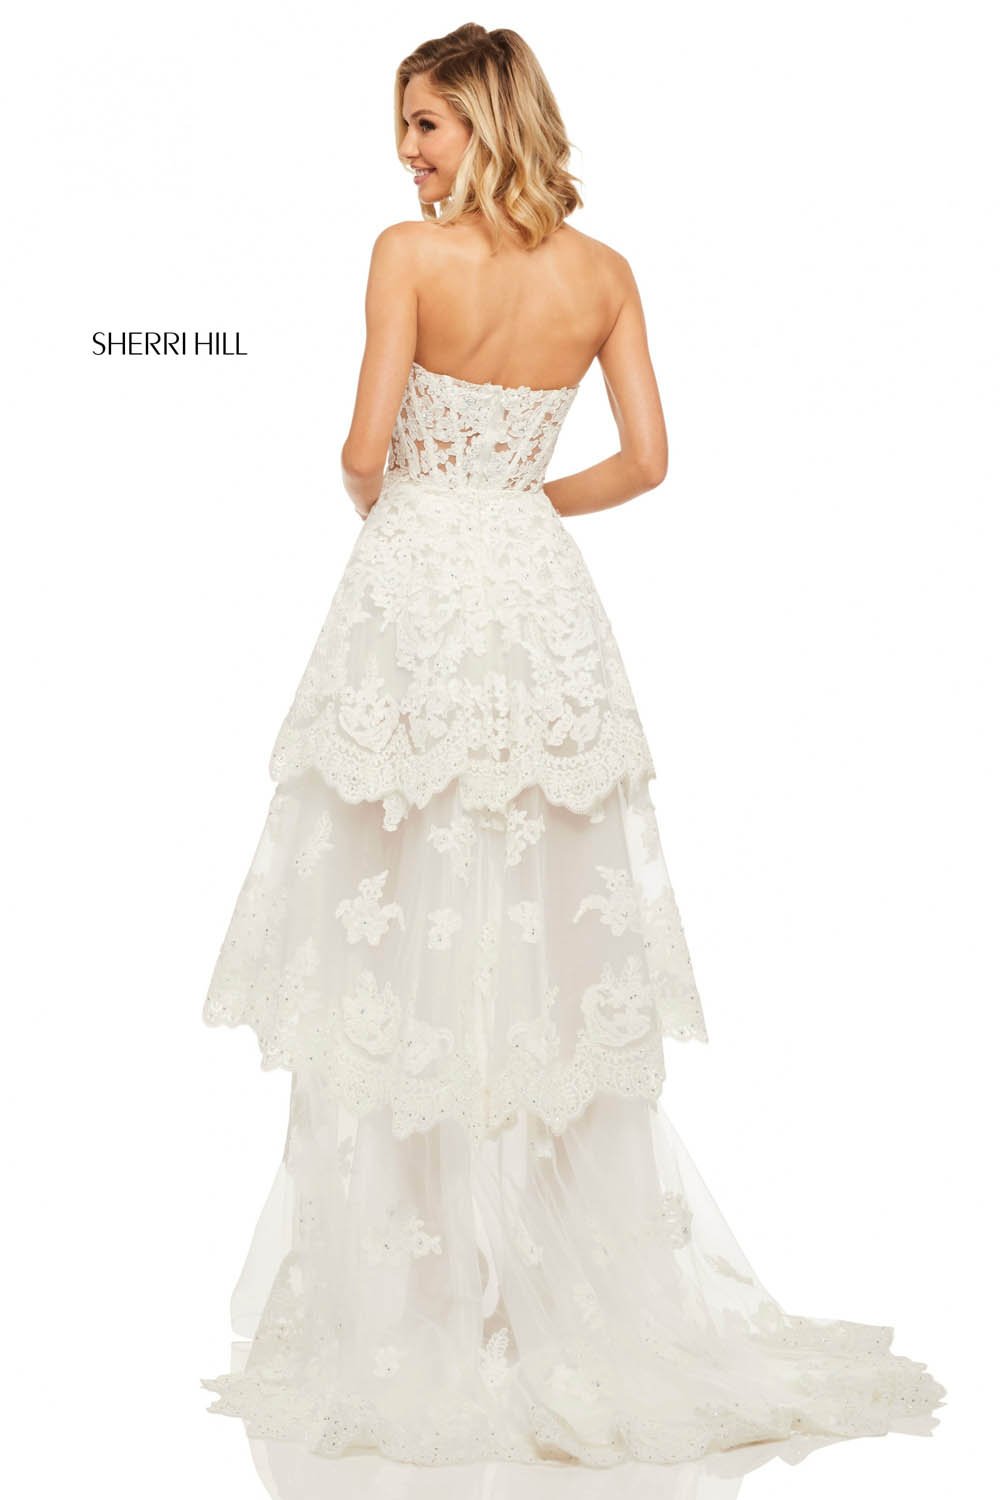 Sherri Hill 52513 dress images in these colors: Ivory, Black.